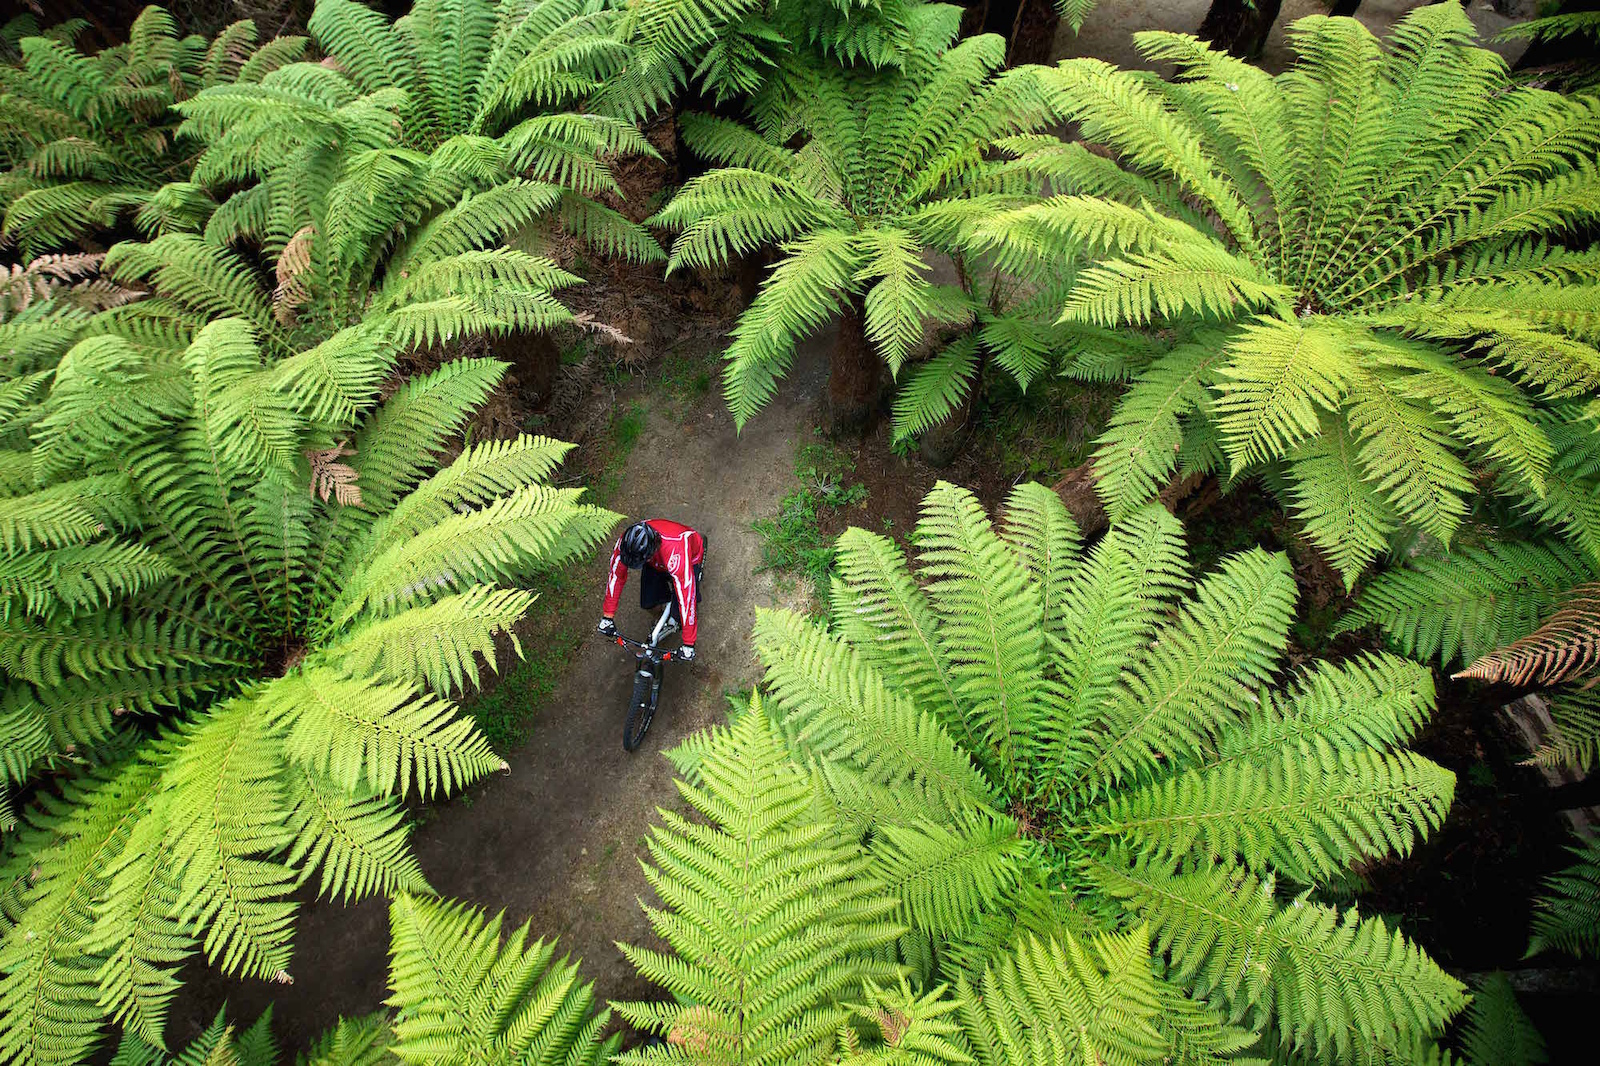 Puarenga Trail runs alongside the stream of the same name. In Maori it means 'flowers of sulphur' named after the sulphur particles floating on the surface.
Rotorua is famous for its magical geothermal landscape, not just MTB.
Photo: Graeme Murray (www.graememurray.com)